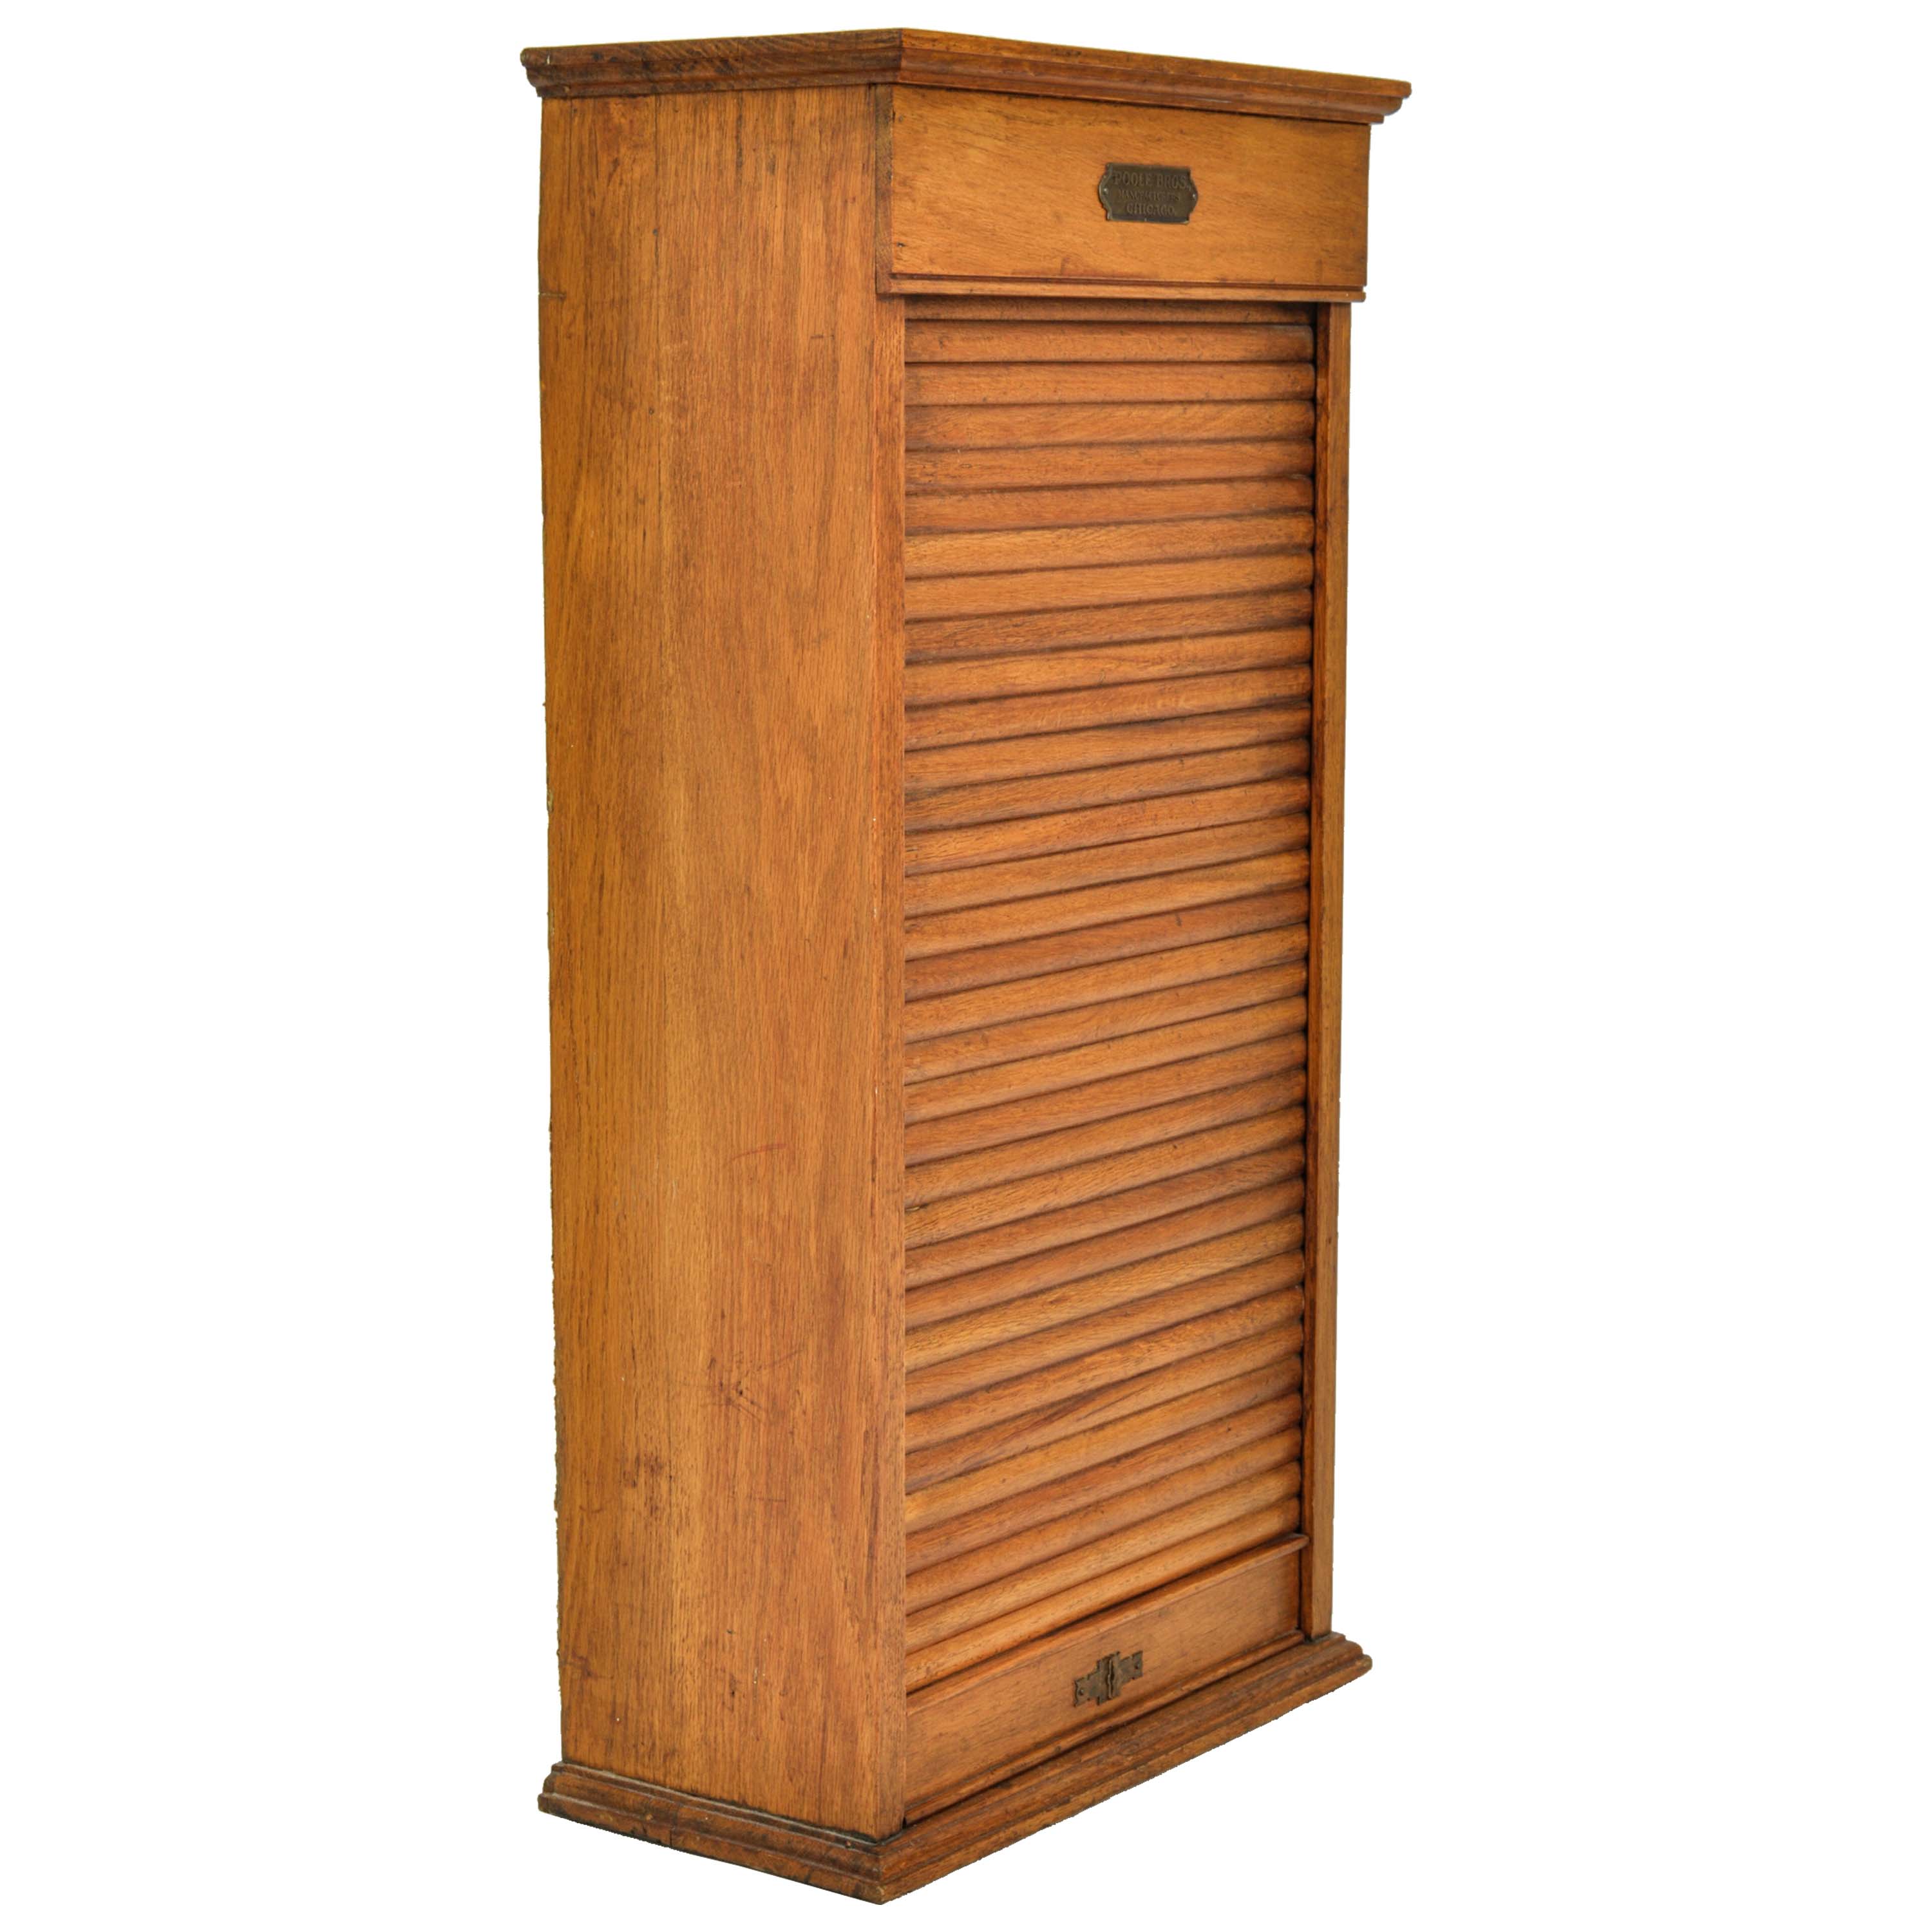 Antique American Oak Poole Bros Railway Ticket Roll Top Tambour Cabinet Chicago For Sale